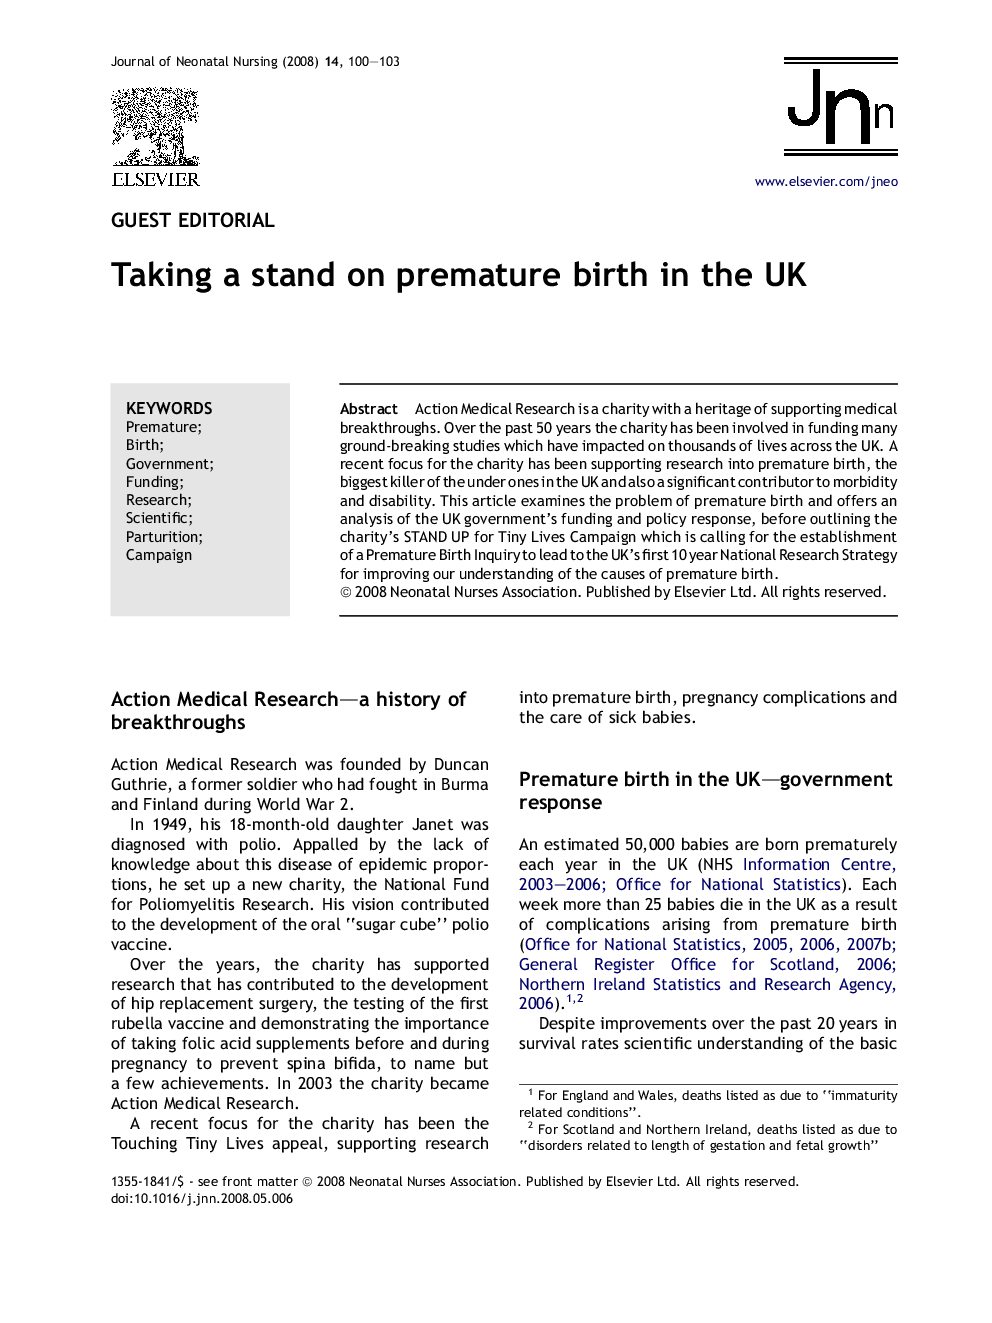 Taking a stand on premature birth in the UK